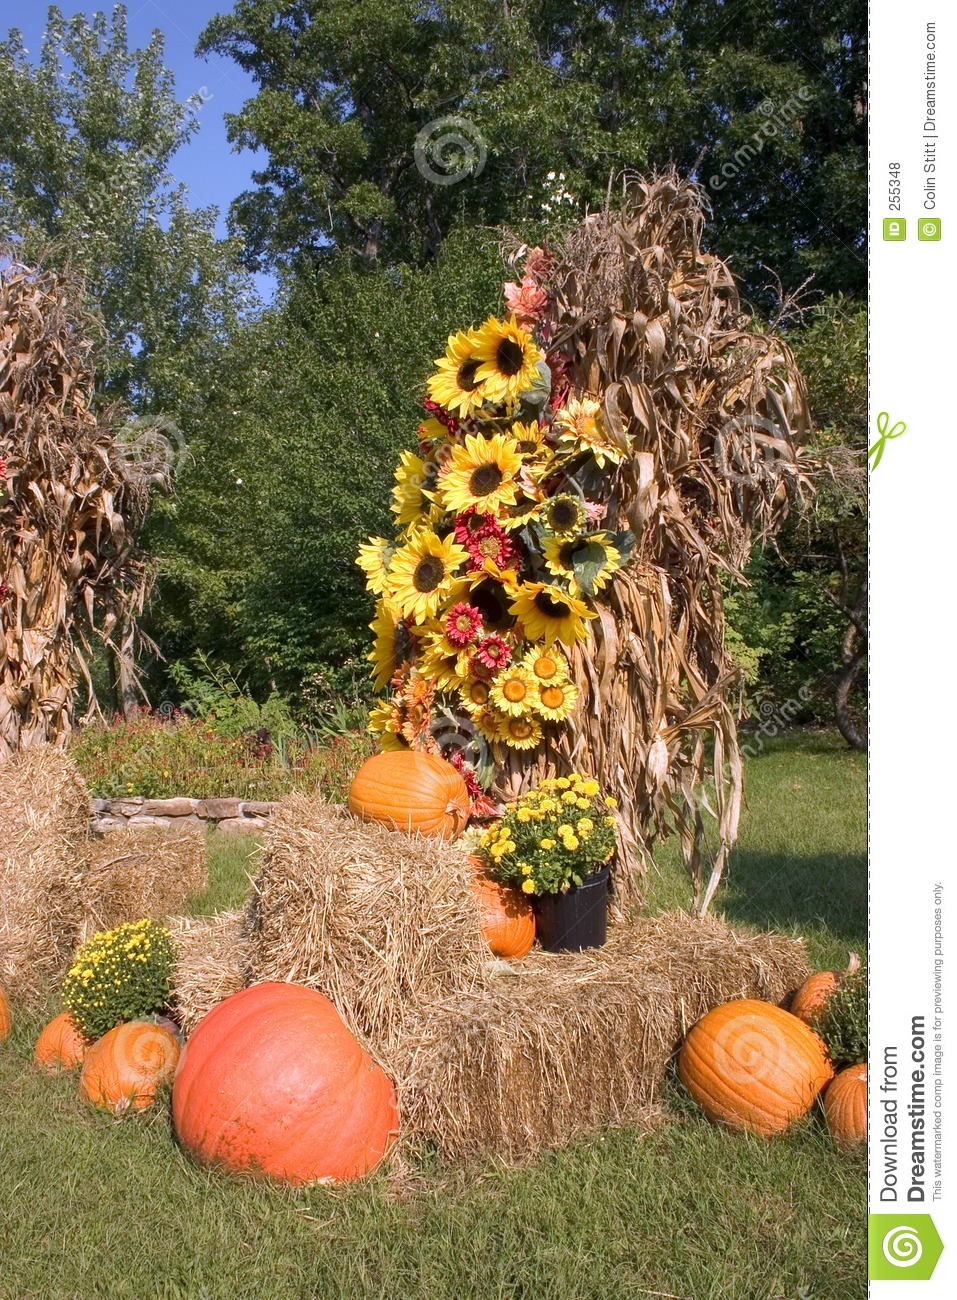 Fall Decorations 2 Royalty Free Stock Photos   Image  255348